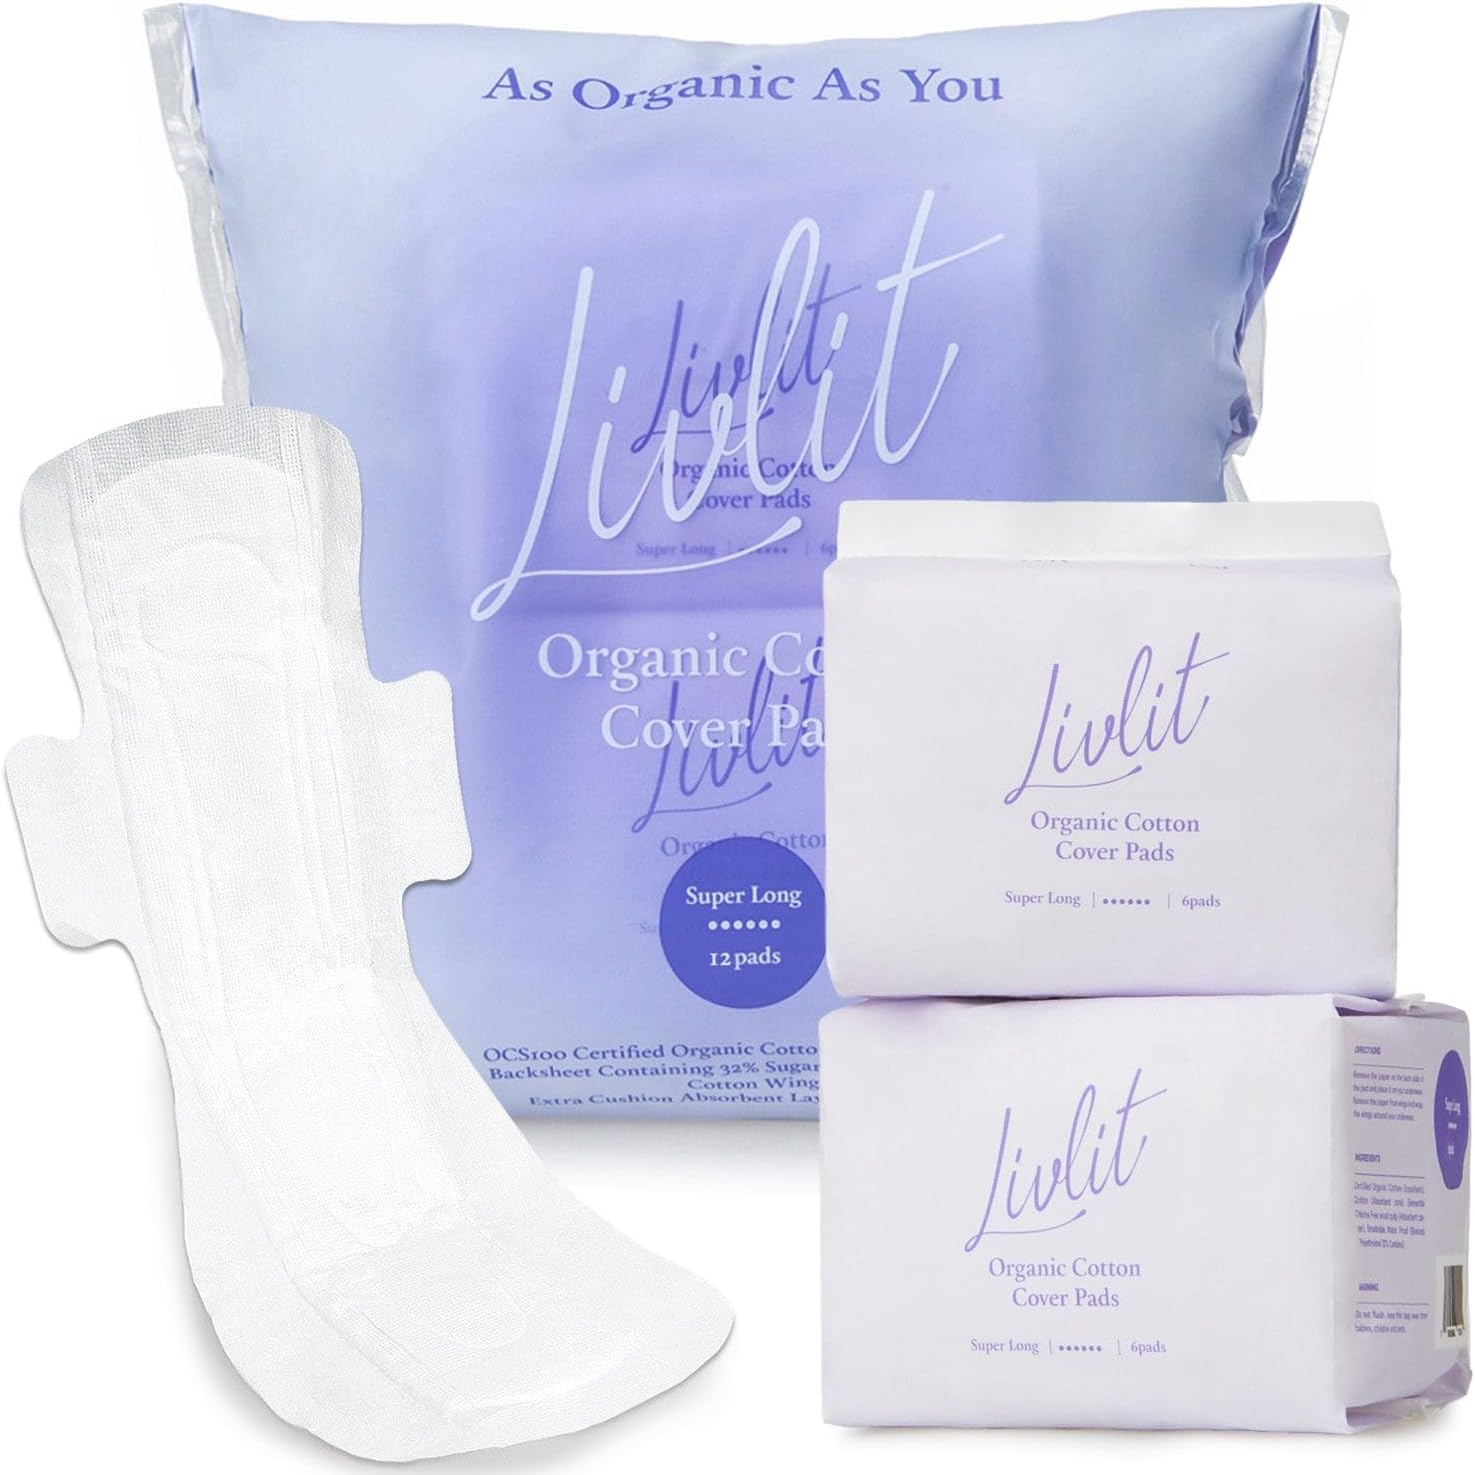 Livlit Super Long Overnight Pads Sanitary Pads, best pads for heavy flow